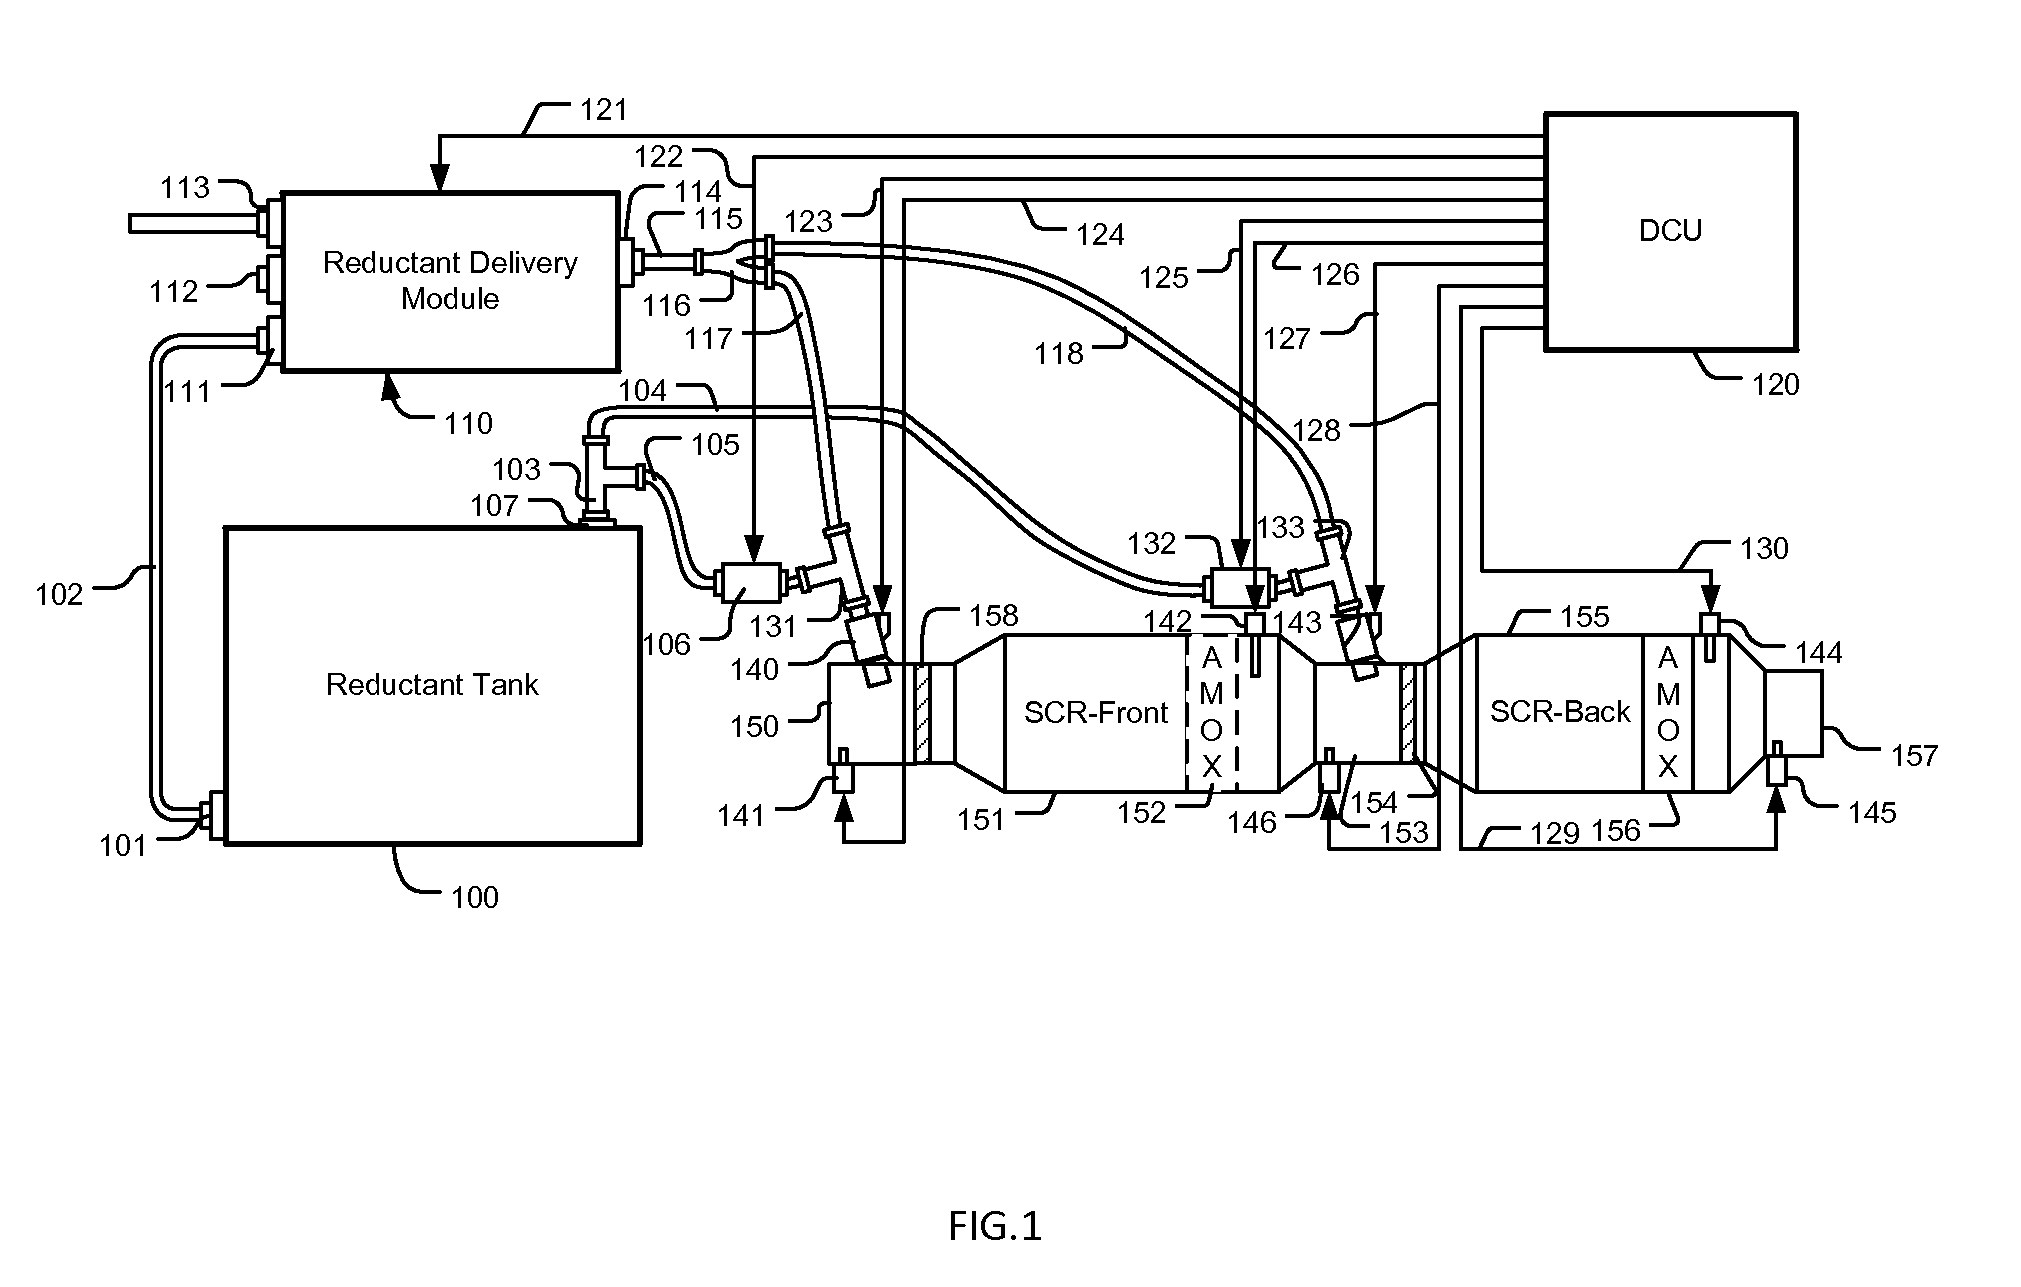 Multi-stage SCR Control and Diagnostic System